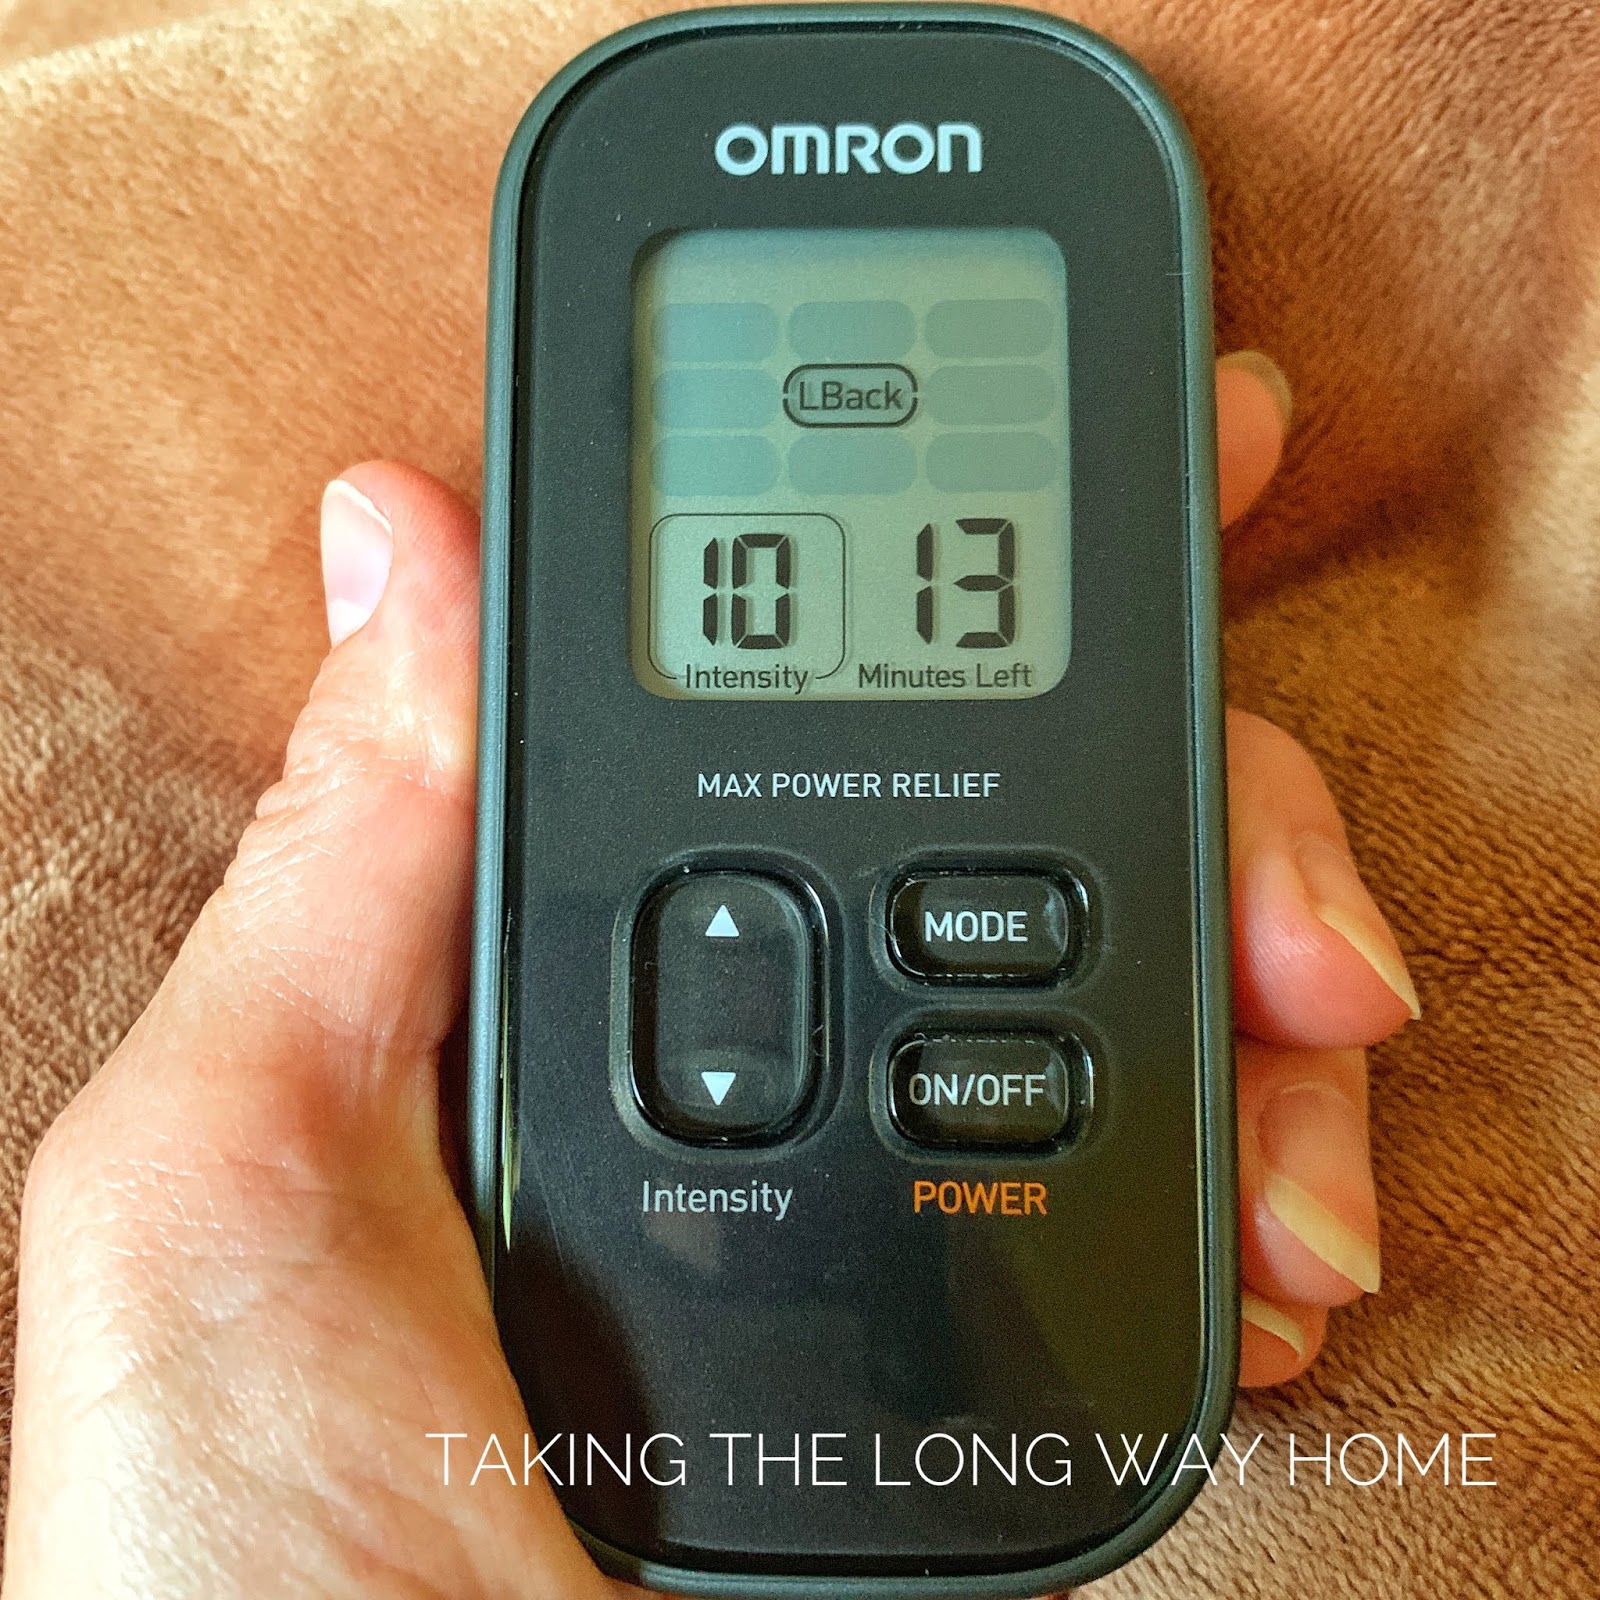 A Quick Overview of the OMRON Max Power Relief TENS Unit 